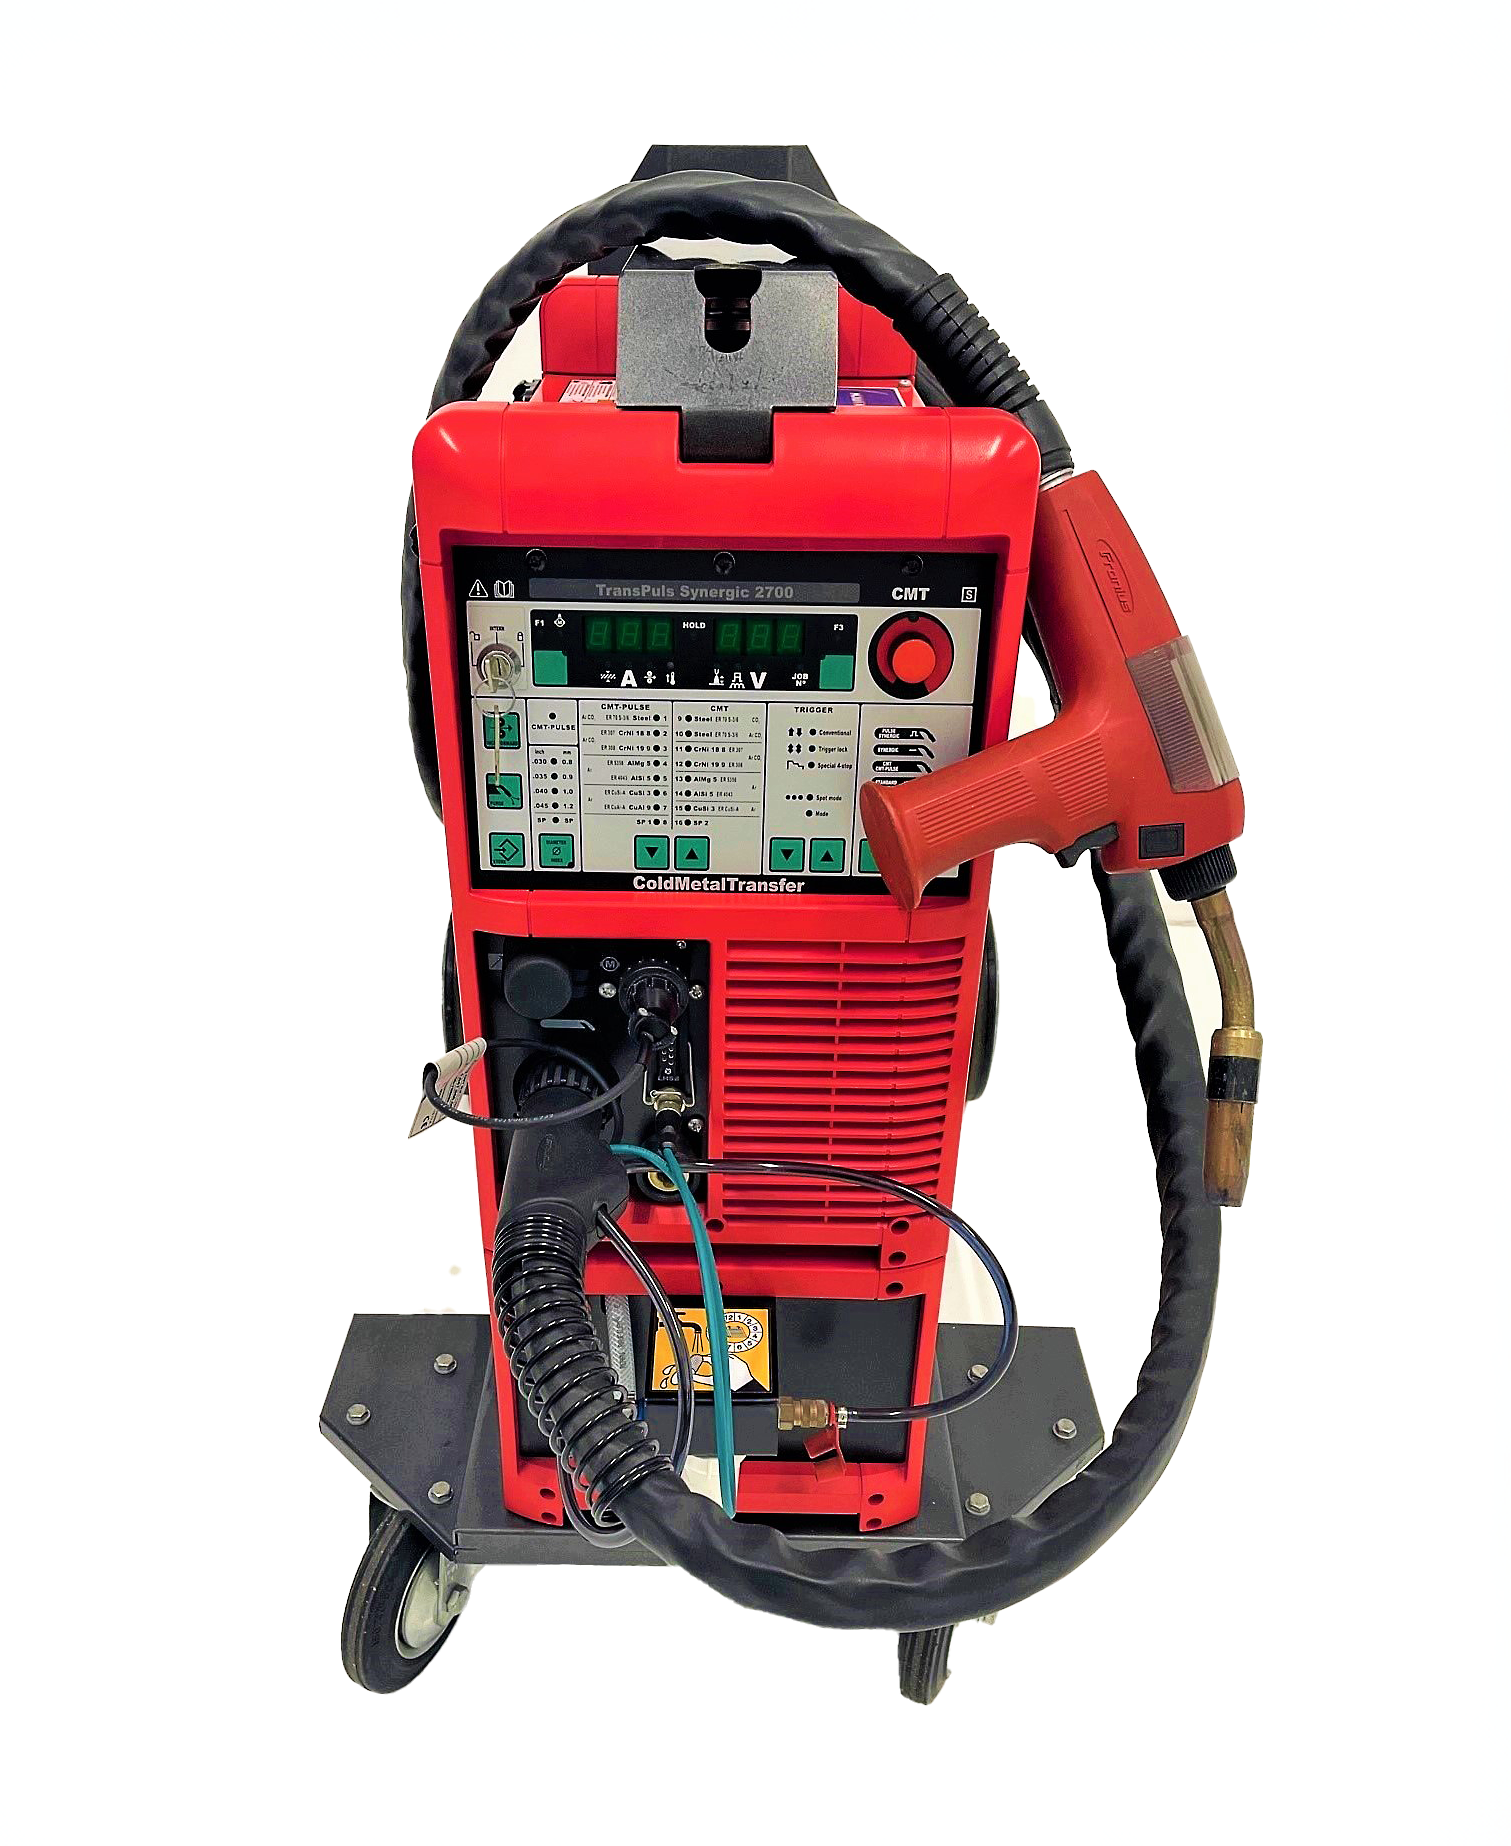 Fronius Welding Products Products MIG / TIG / Stick - Robaina Industries